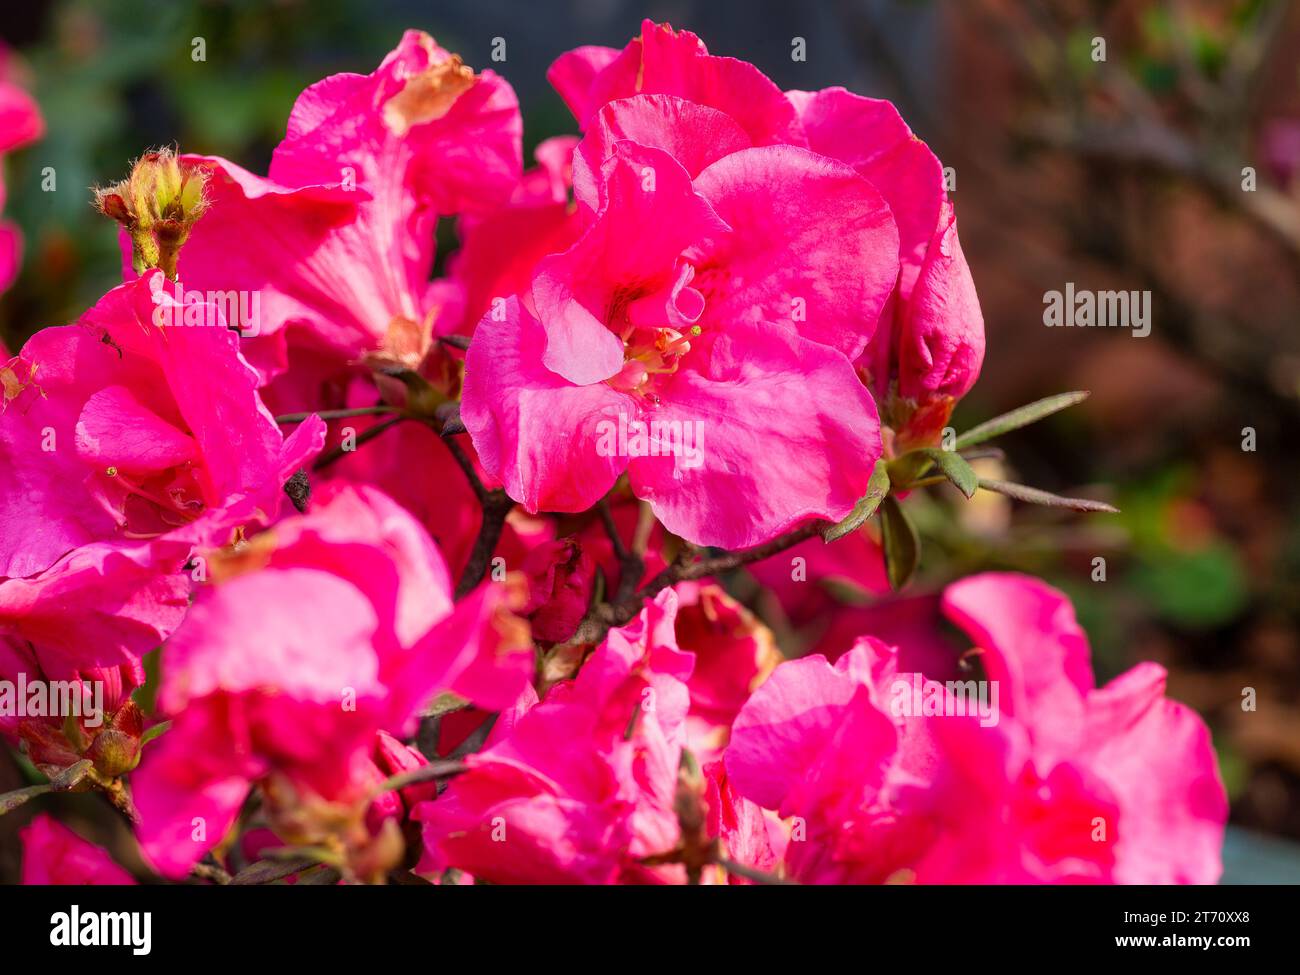 Pink Bougainvillea flowers in full bloom in the Himalayan area at Darjeeling, India Stock Photo